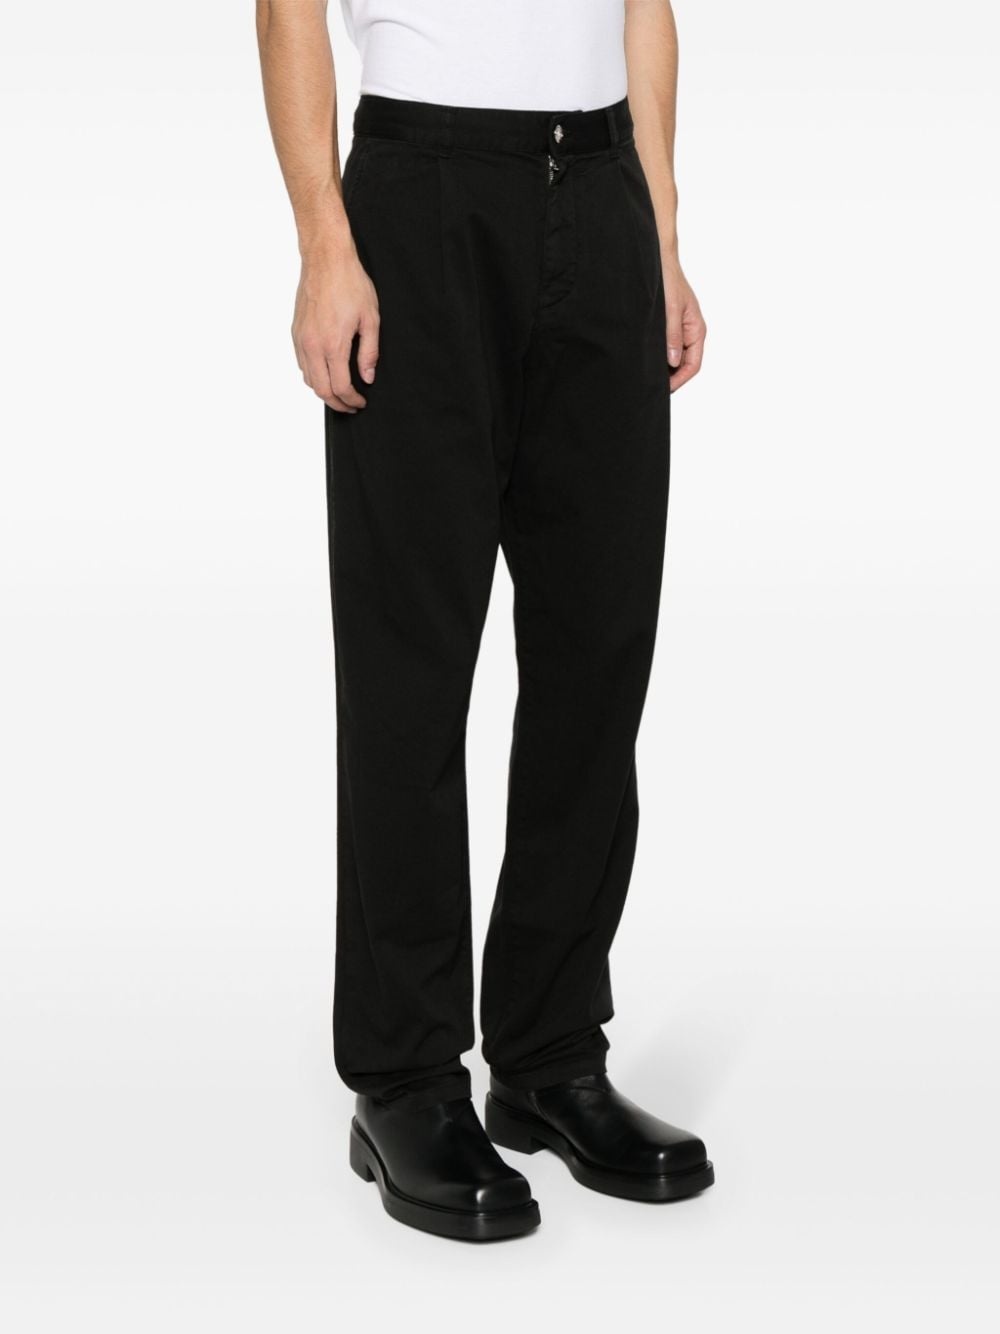 embroidered-motif chino trousers - 3